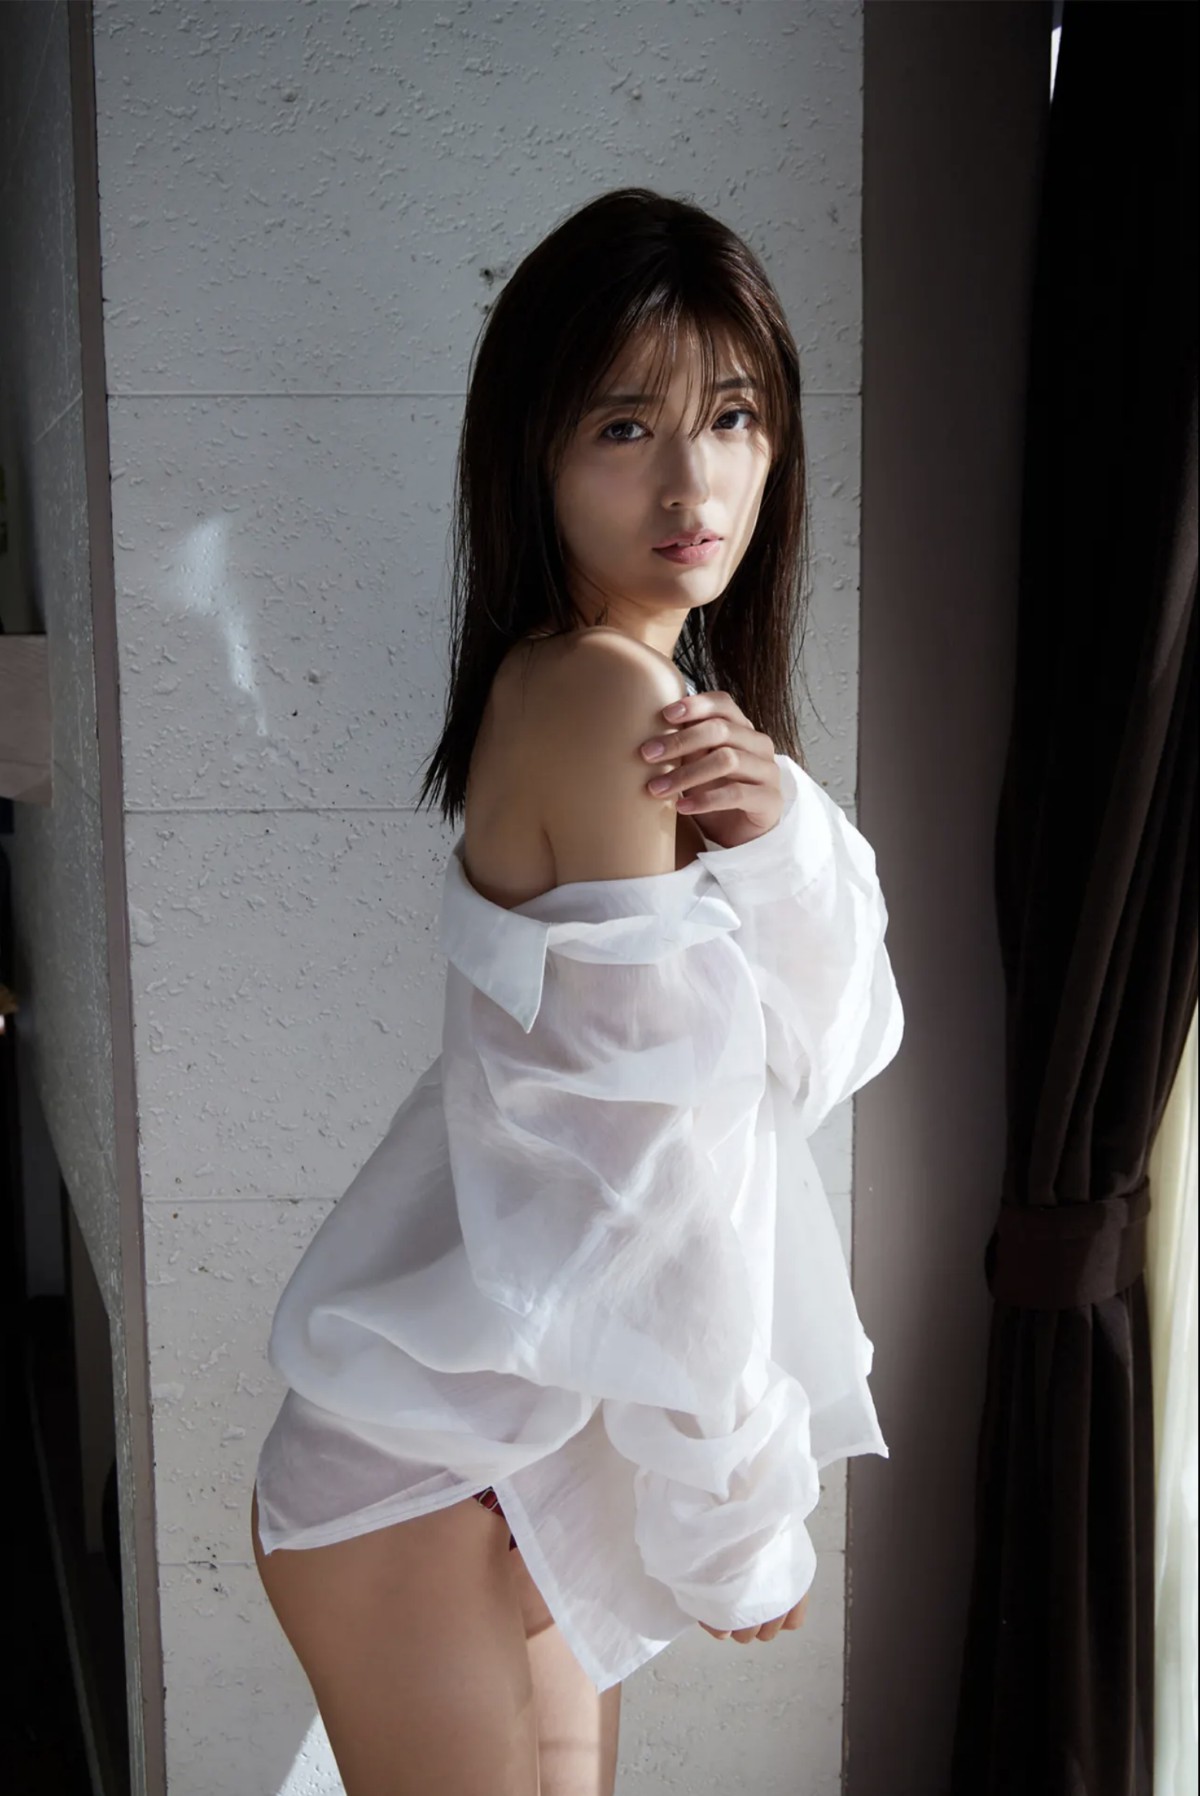 FRIDAYデジタル写真集 2021 03 10 Mio Kudo 工藤美桜 An Adult Sexy That Fascinates You For The First Time 0063 7757467255.jpg